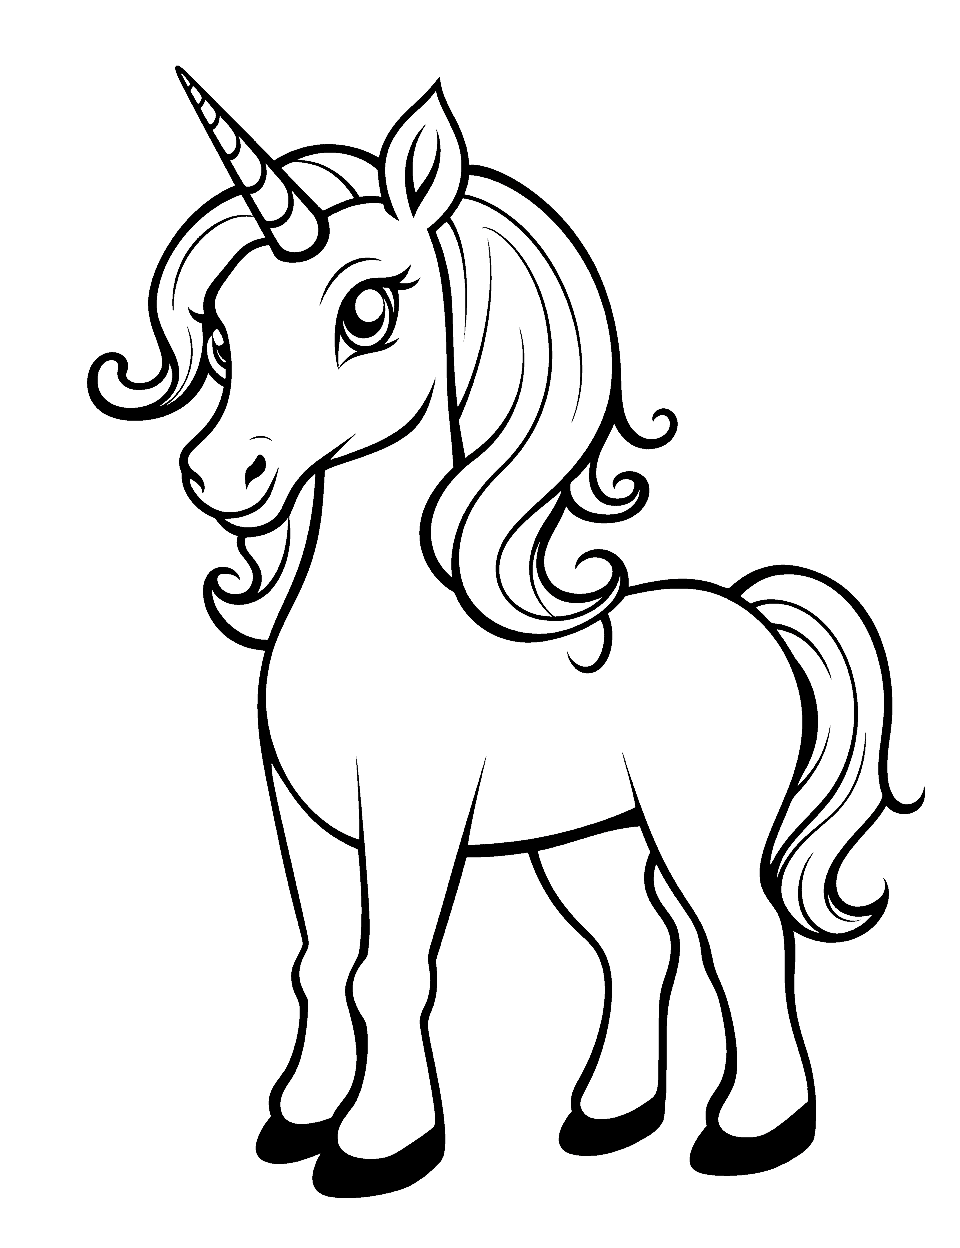 My Little Unicorn Coloring Page - A tribute to “My Little Pony,” featuring a small, cheerful unicorn in the style of the popular show.